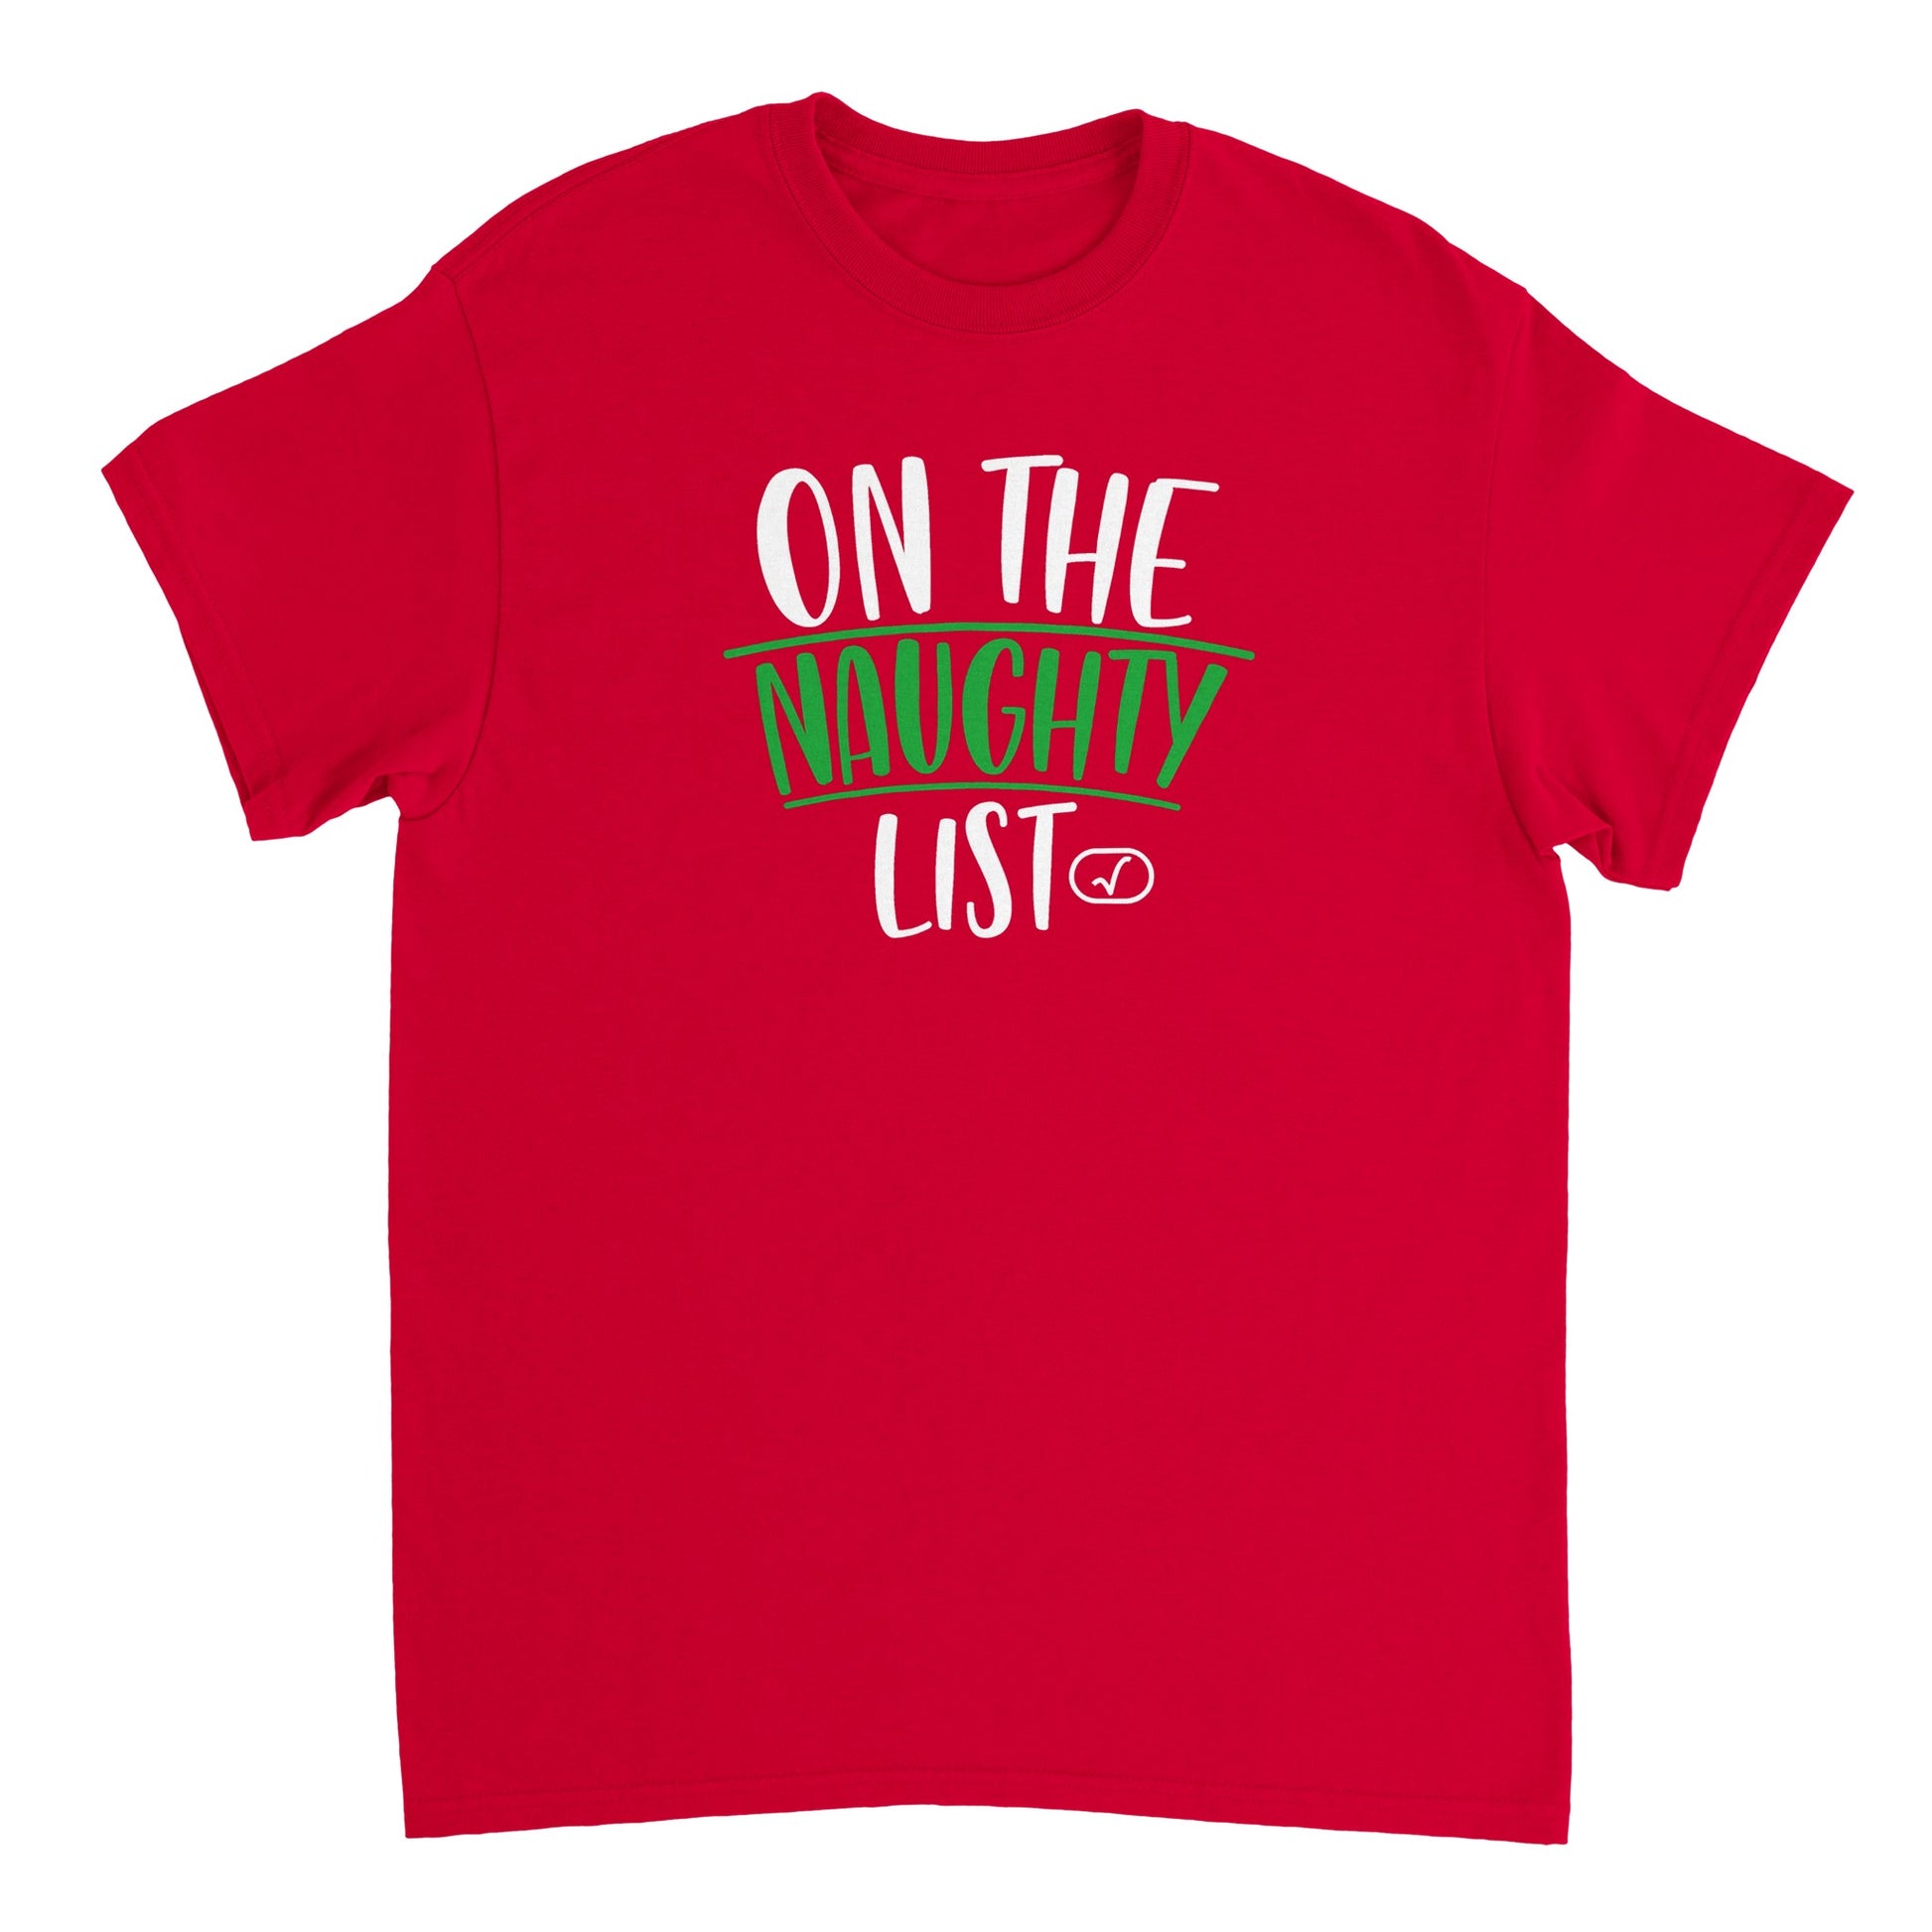 a red t - shirt that says on the naughty list